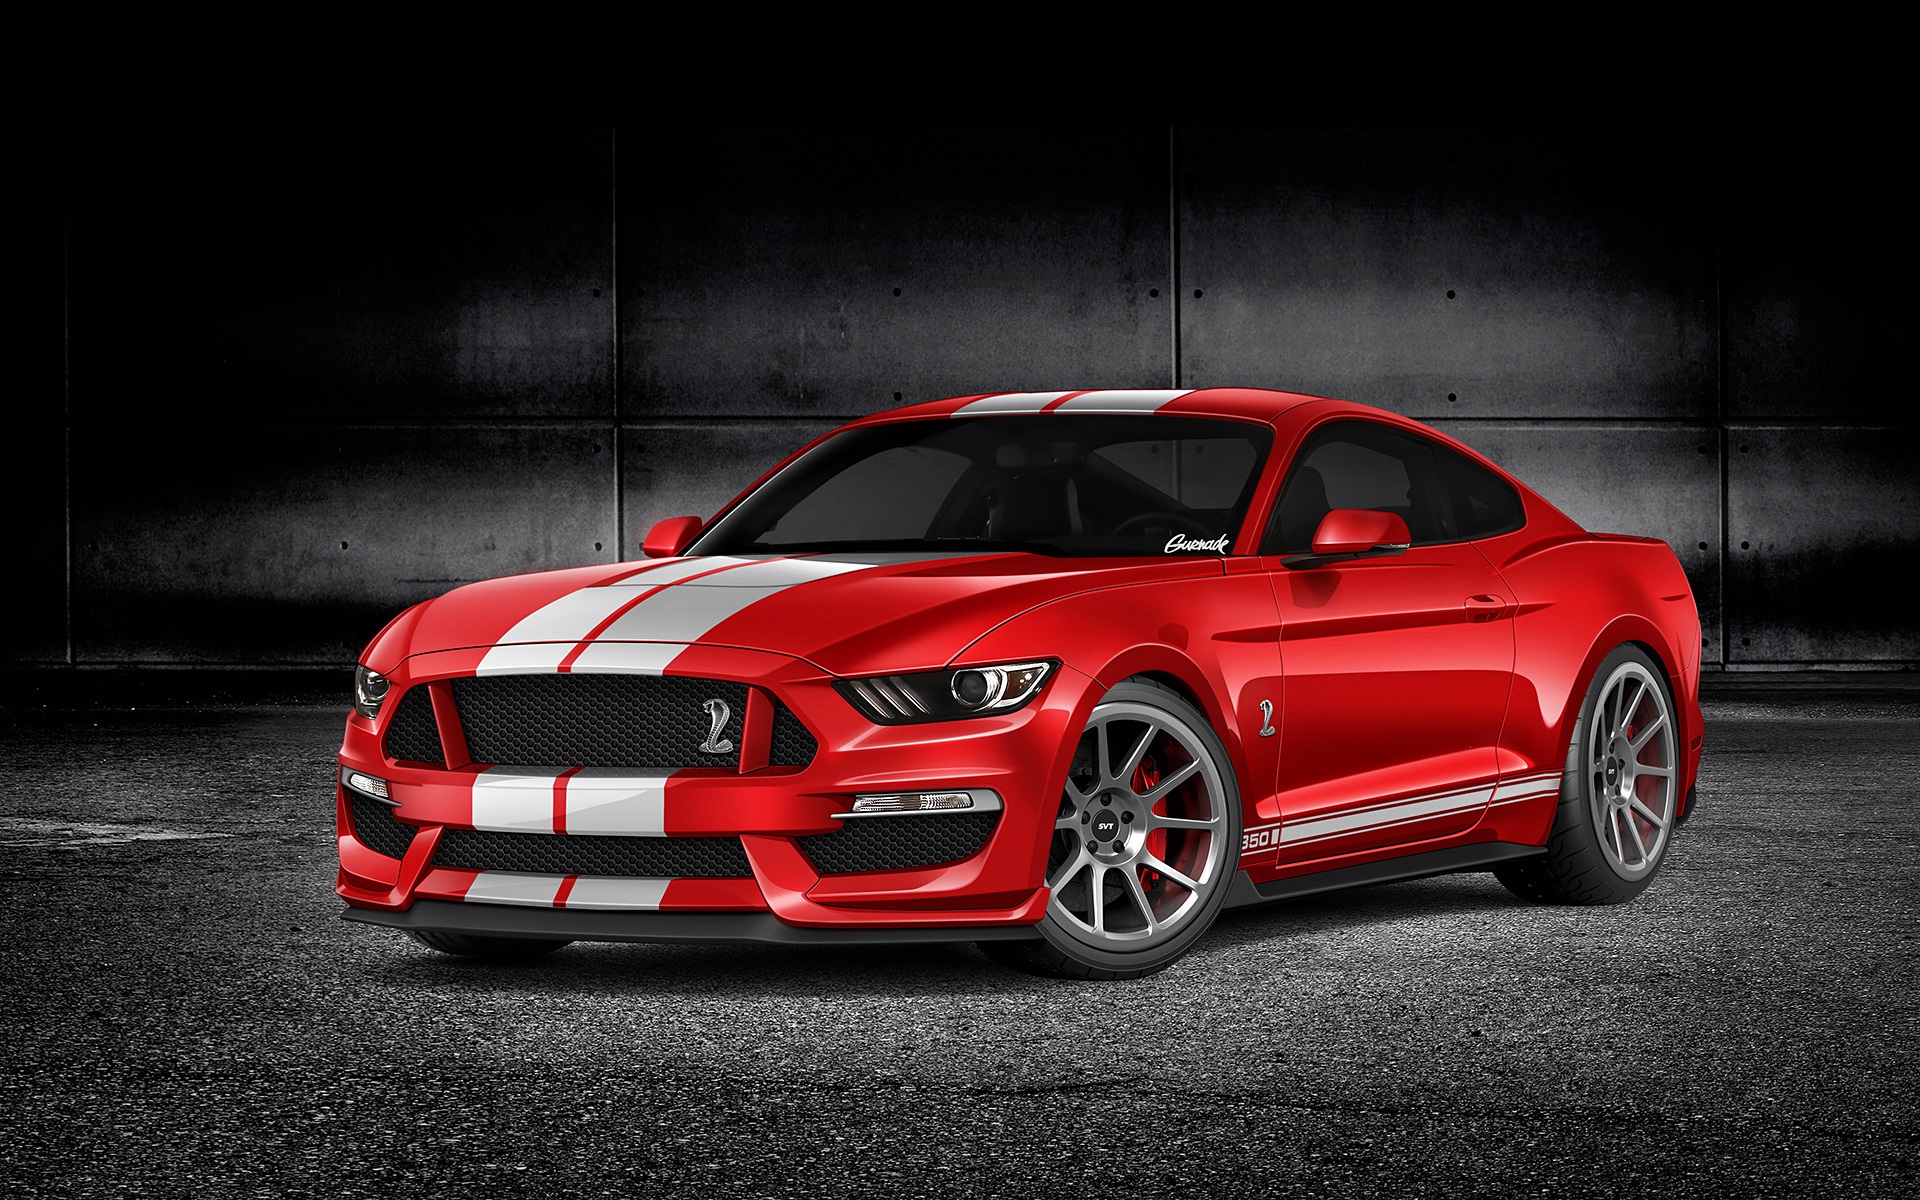 Ford Mustang Gt350 Red Car Front View Wallpaper Cars Wallpaper Better